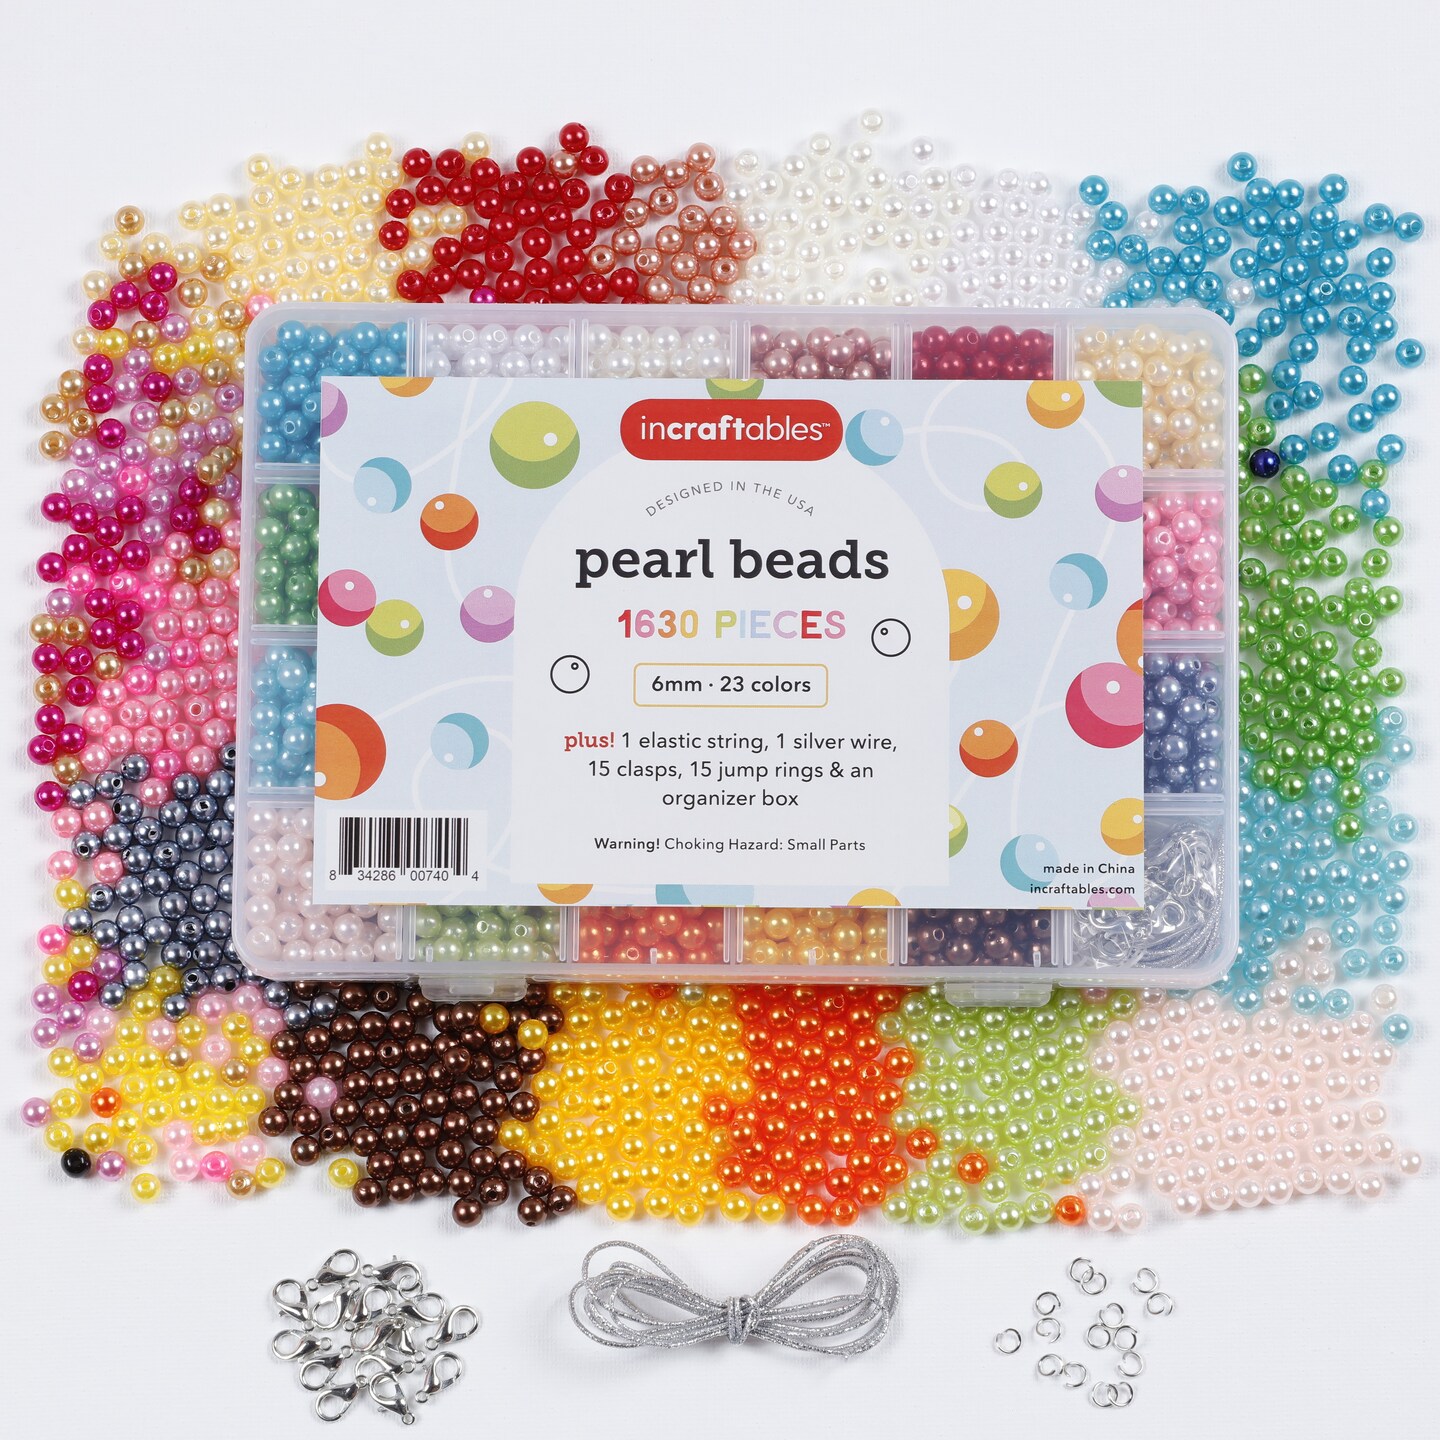 Incraftables Pearl Beads for Jewelry Making 1700pcs (24 Colors). 6mm Round Pearl Beads for Bracelets Making &#x26; Crafting. Assorted Pearls for crafts for Kids &#x26; Adults with Silver Wire, String &#x26; Clasps